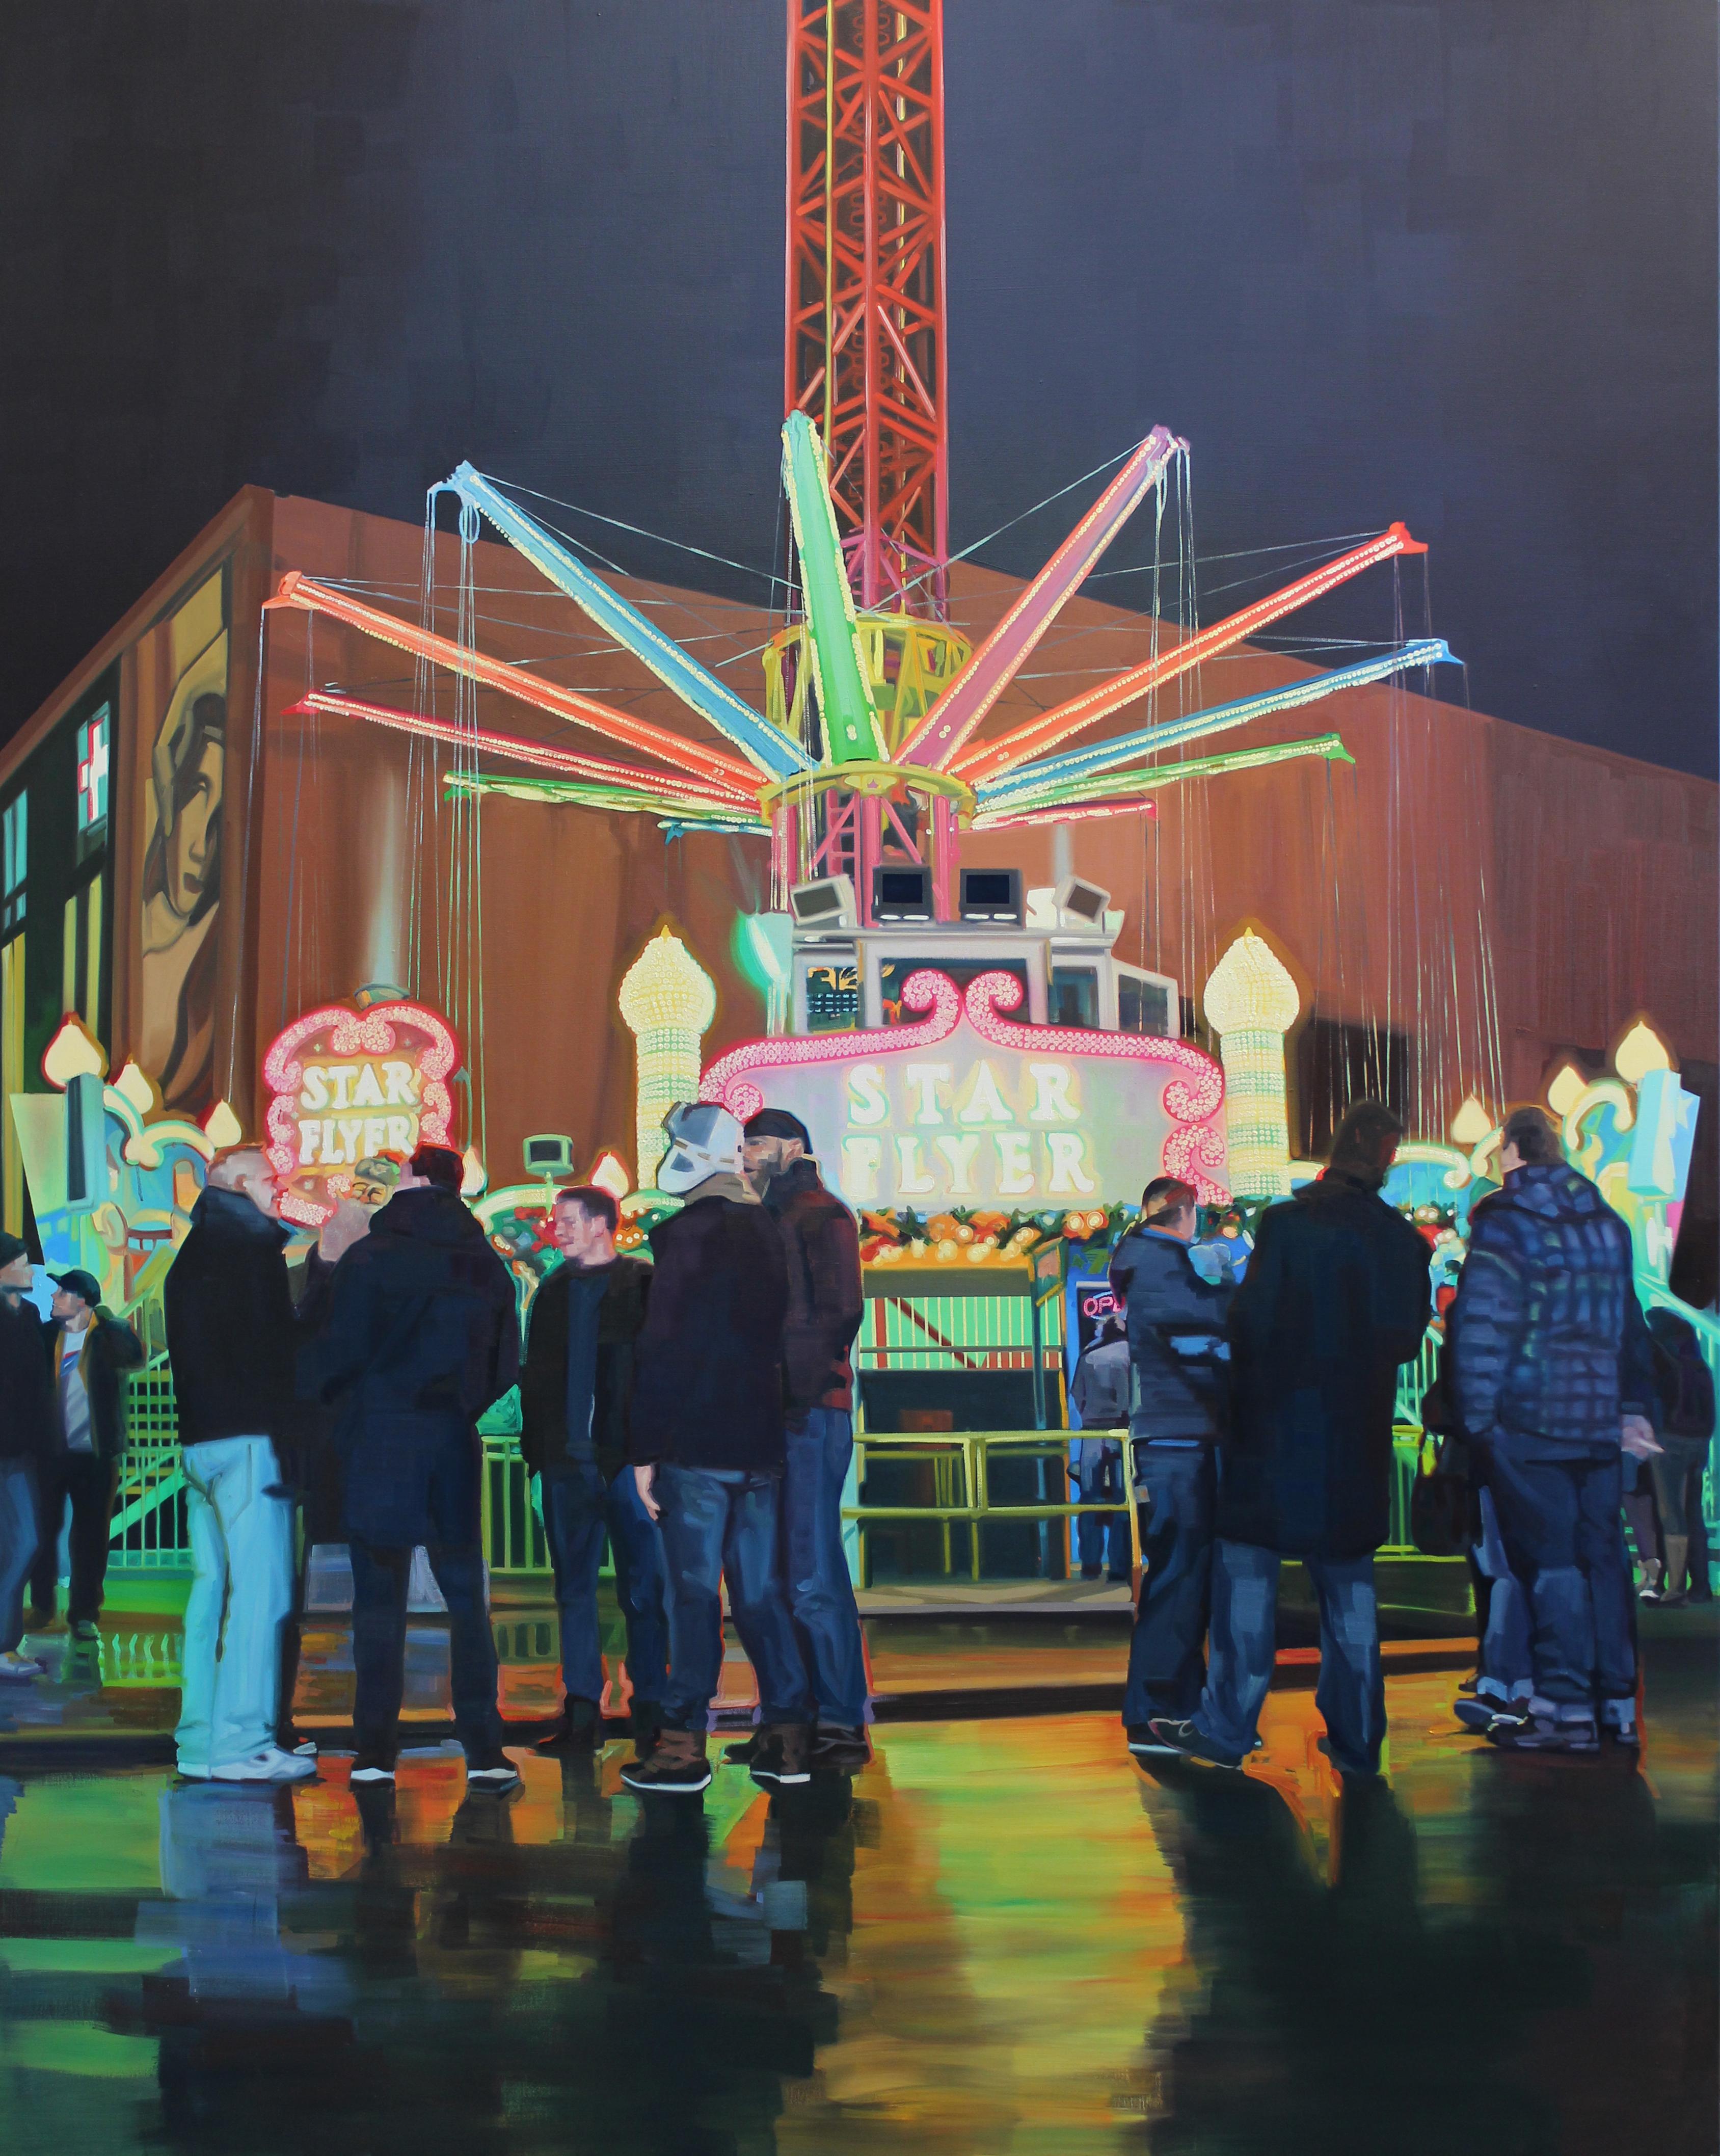 Large scale figurative canvas by British artist Cameron Rudd, which depicts a night scene of the winter fairgrounds at Alexanderplatz in Berlin. Cameron Rudd is an established artist who lives and works in Berlin.

If you are interested in this